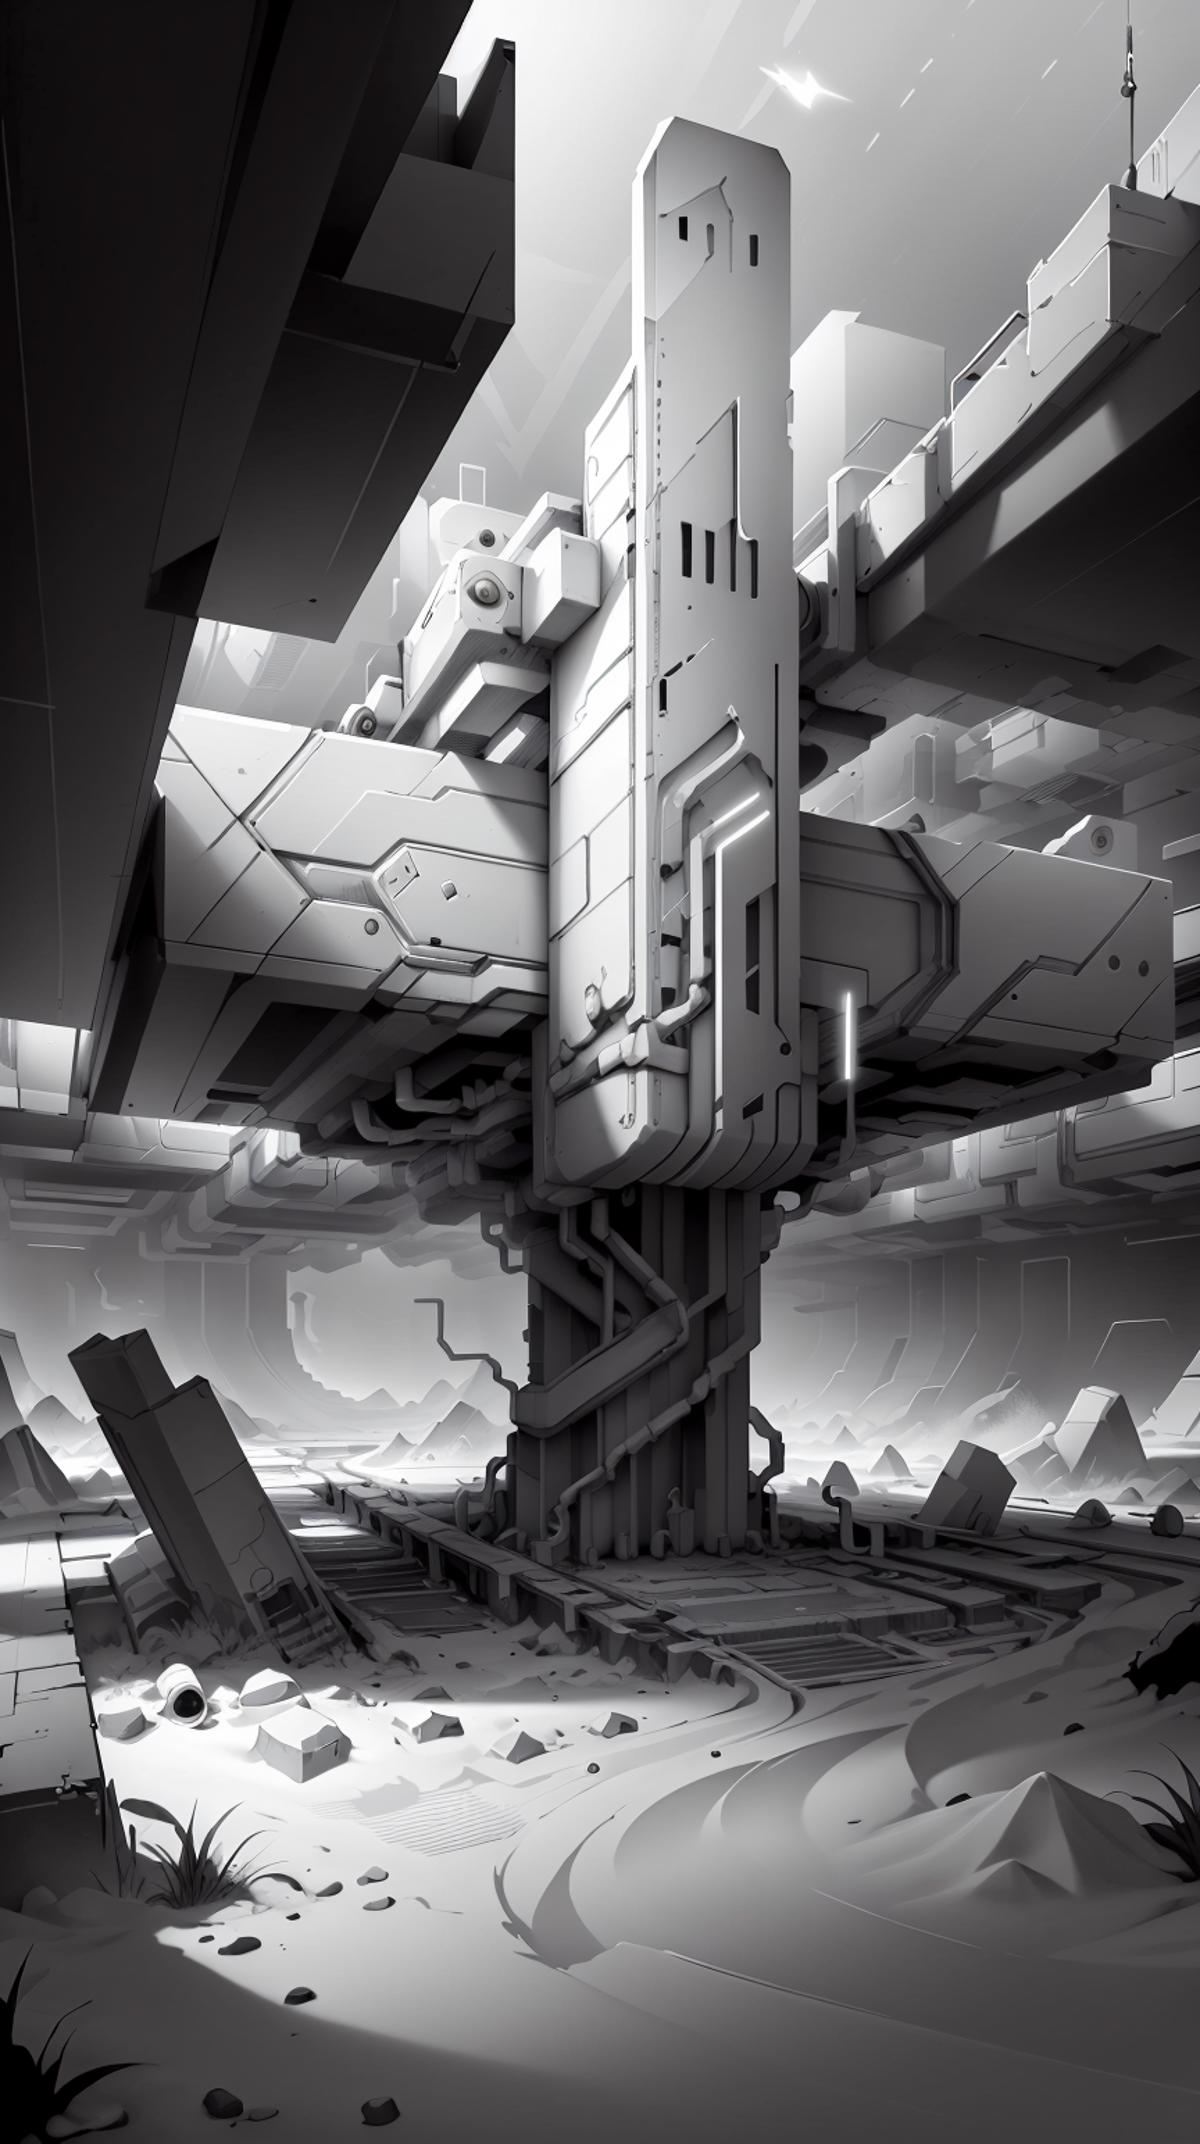 Whitebox Style - Environment - Level Design Concept Art - Game Dev Tool image by mnemic